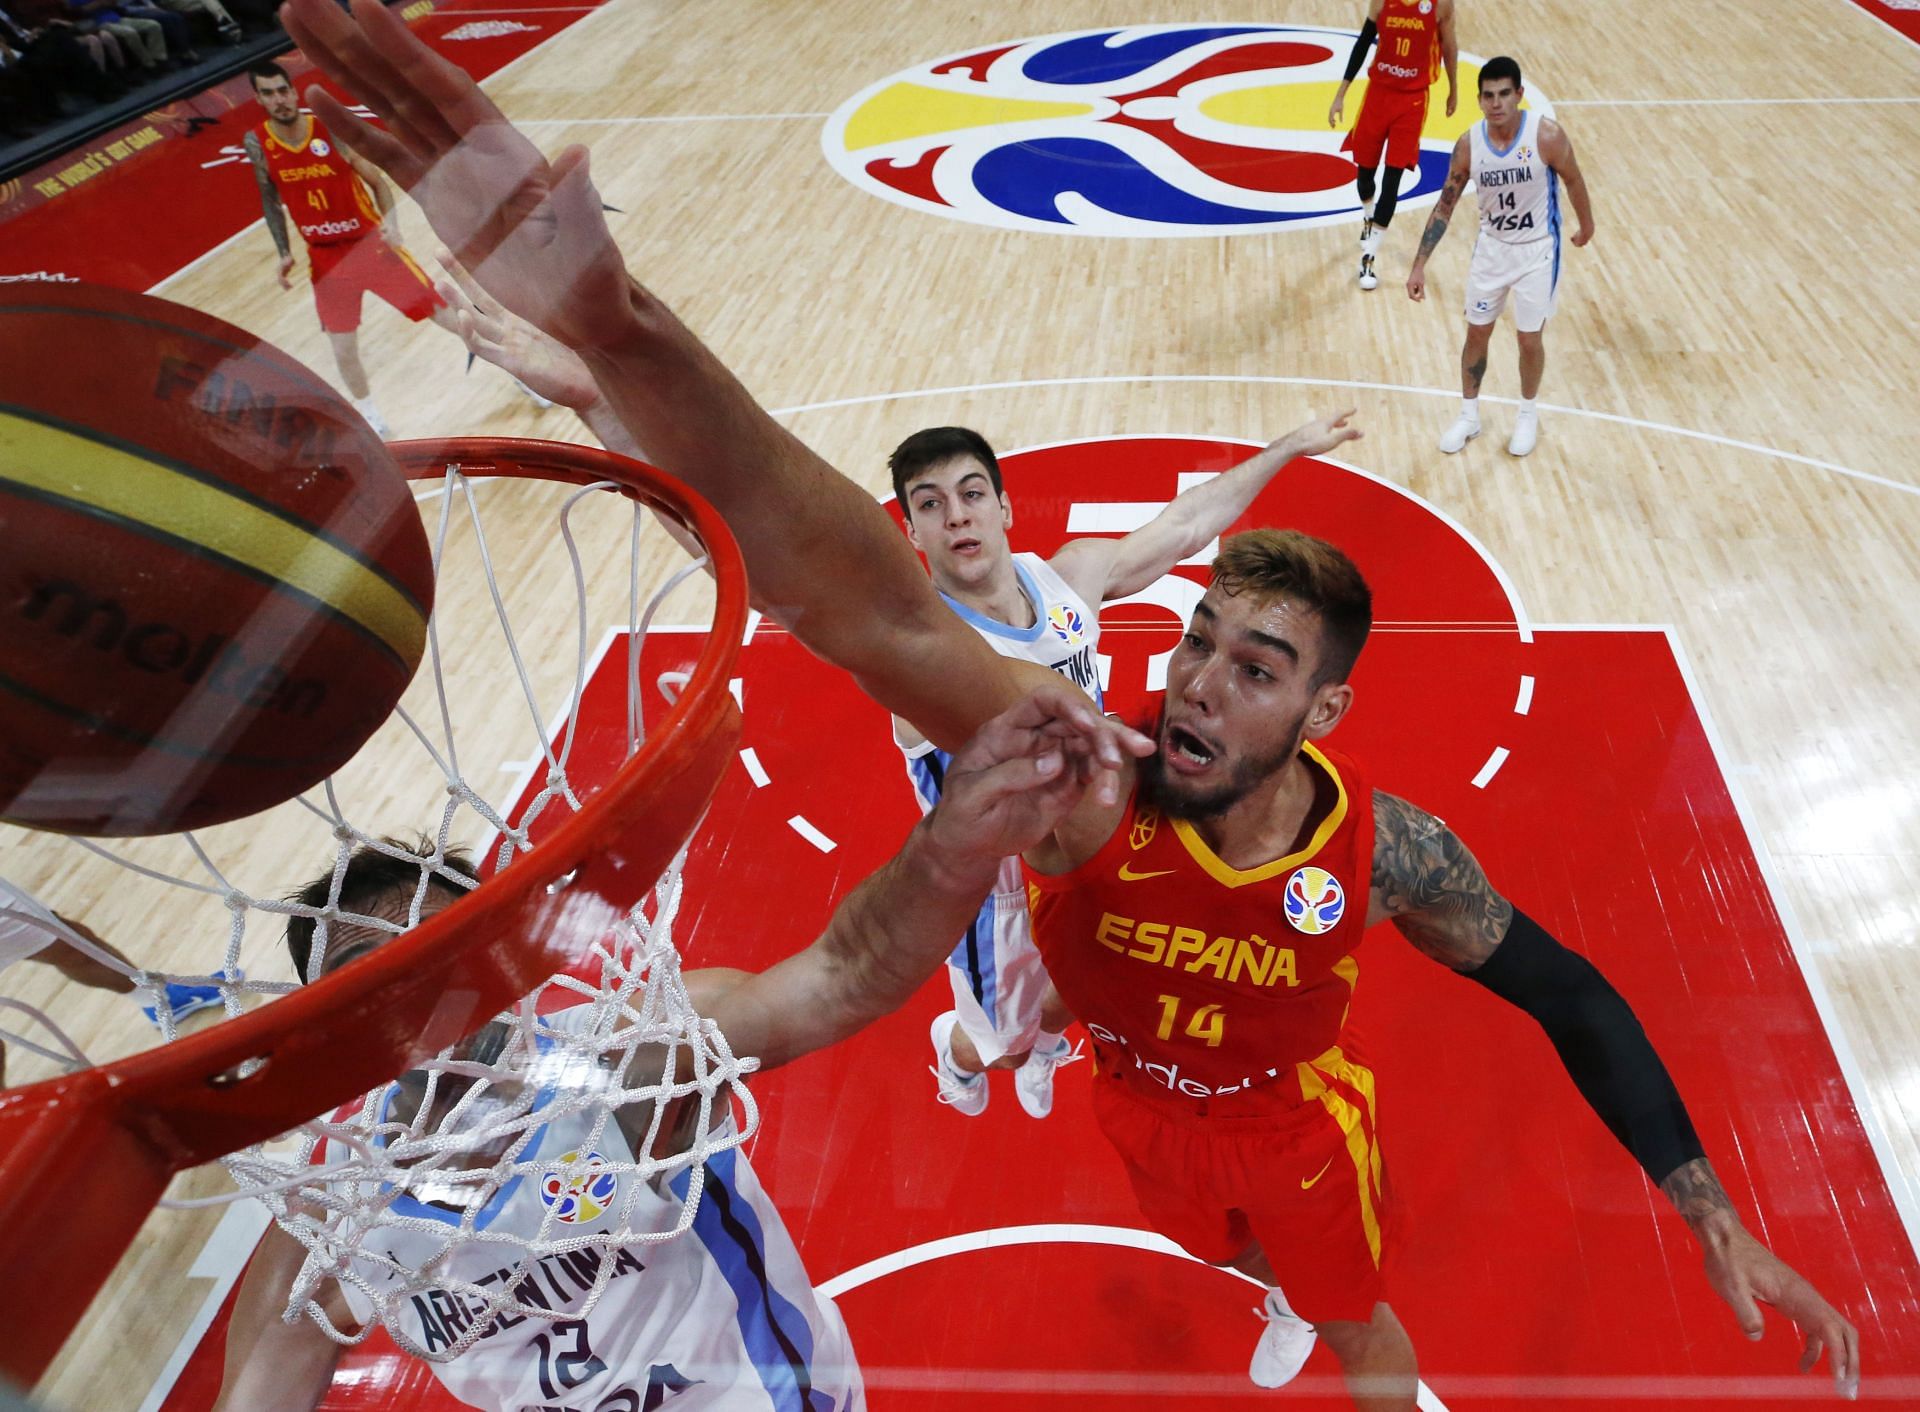 Spain vs Latvia FIBA World Cup 2023 Date, time, where to watch, live stream details, and more